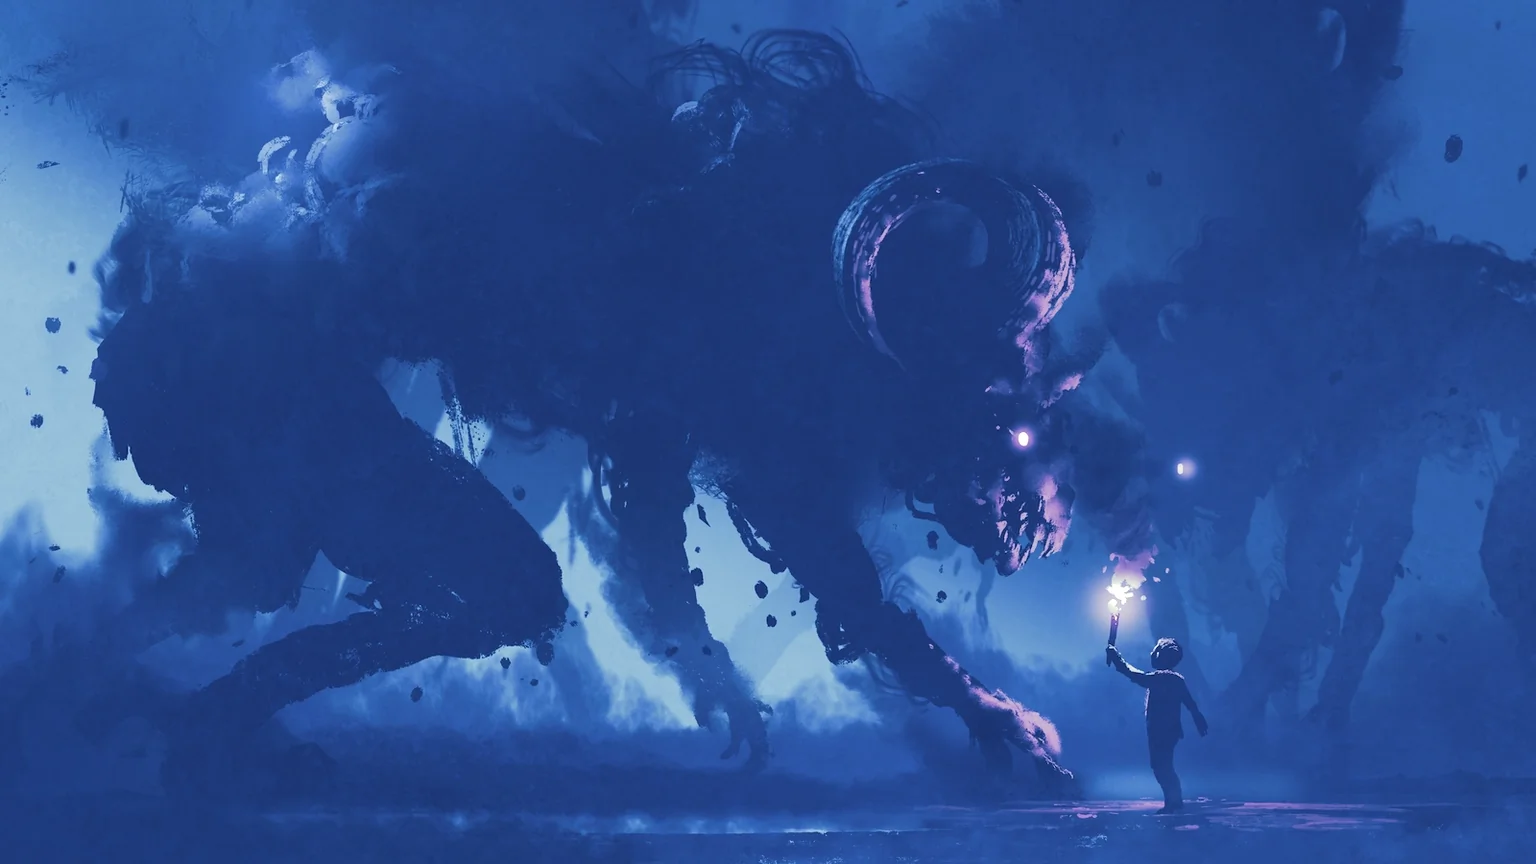 dark fantasy concept showing the boy with a torch facing smoke monsters with demon's horns, digital art style, illustration painting; Shutterstock ID 695511787; Client/Licensee: decryptmedia